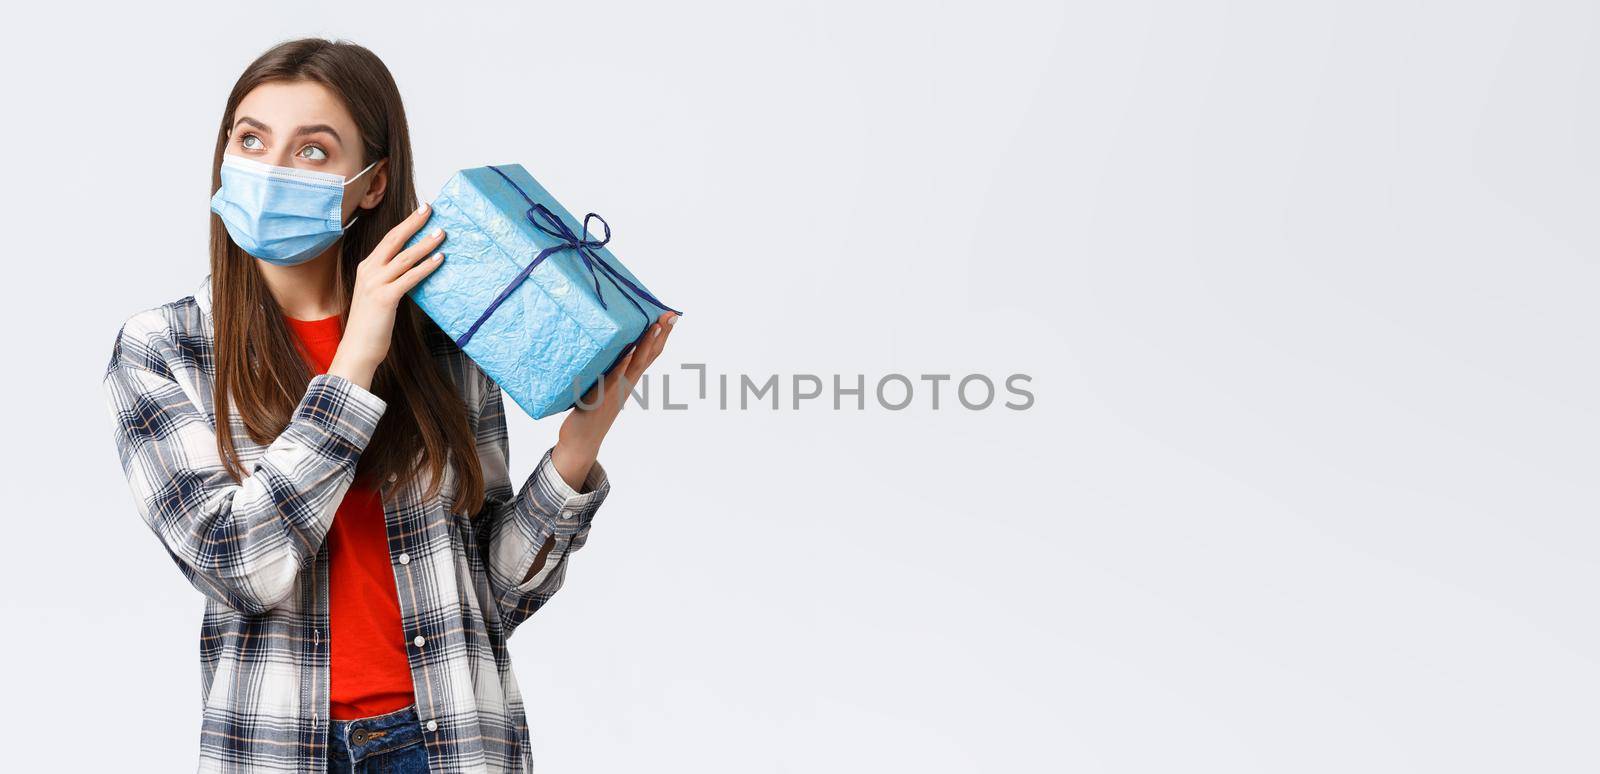 Covid-19, lifestyle, holidays and celebration concept. Curious young cute girl celebrating birthday, shaking gift box to guess what inside, look away thoughtful, lean ear to present, white background.